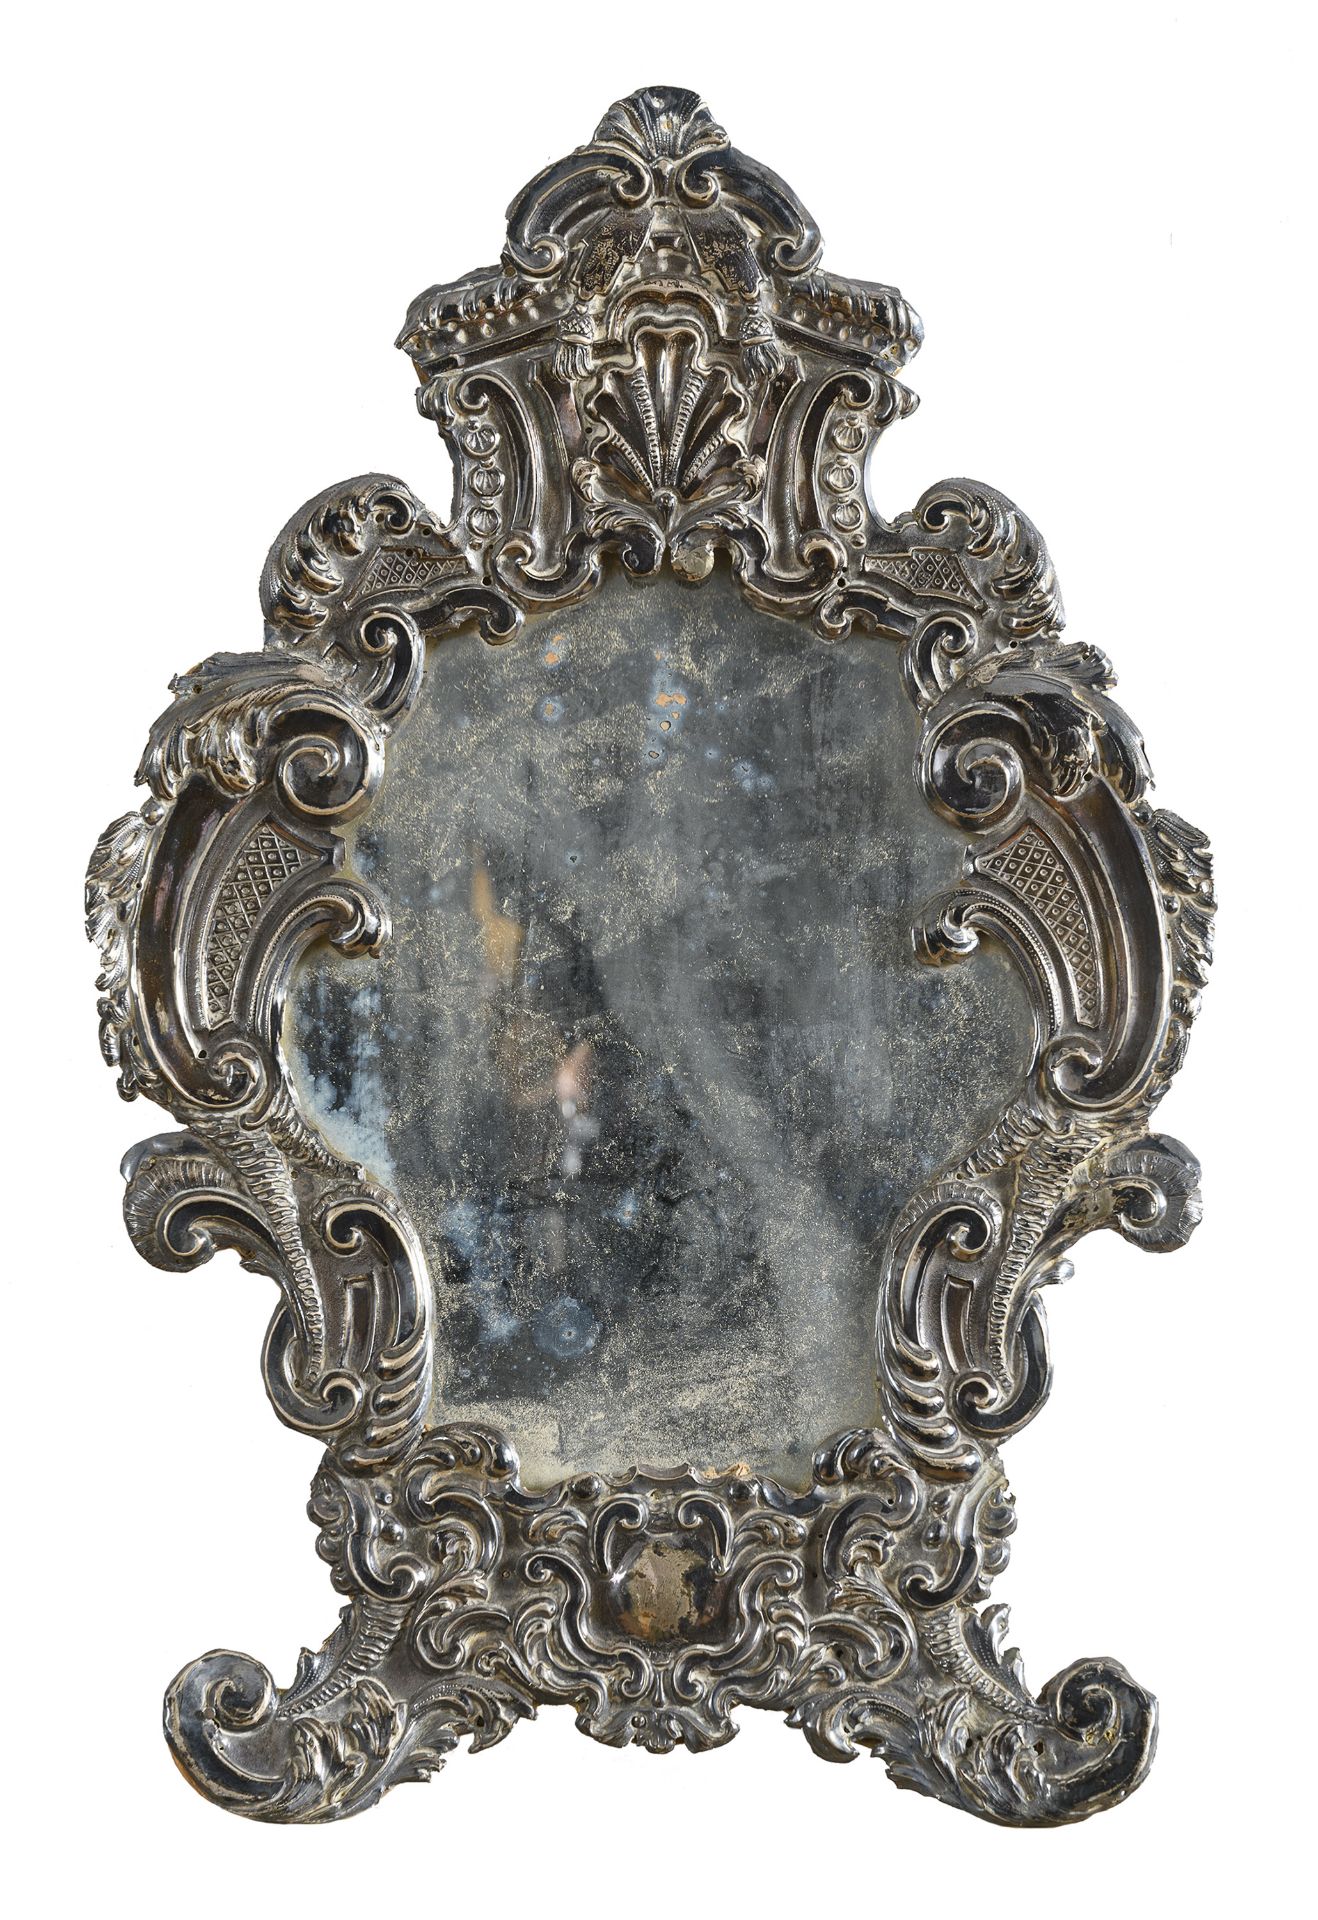 SILVER MIRROR ROME PAPAL STATES EARLY 18TH CENTURY